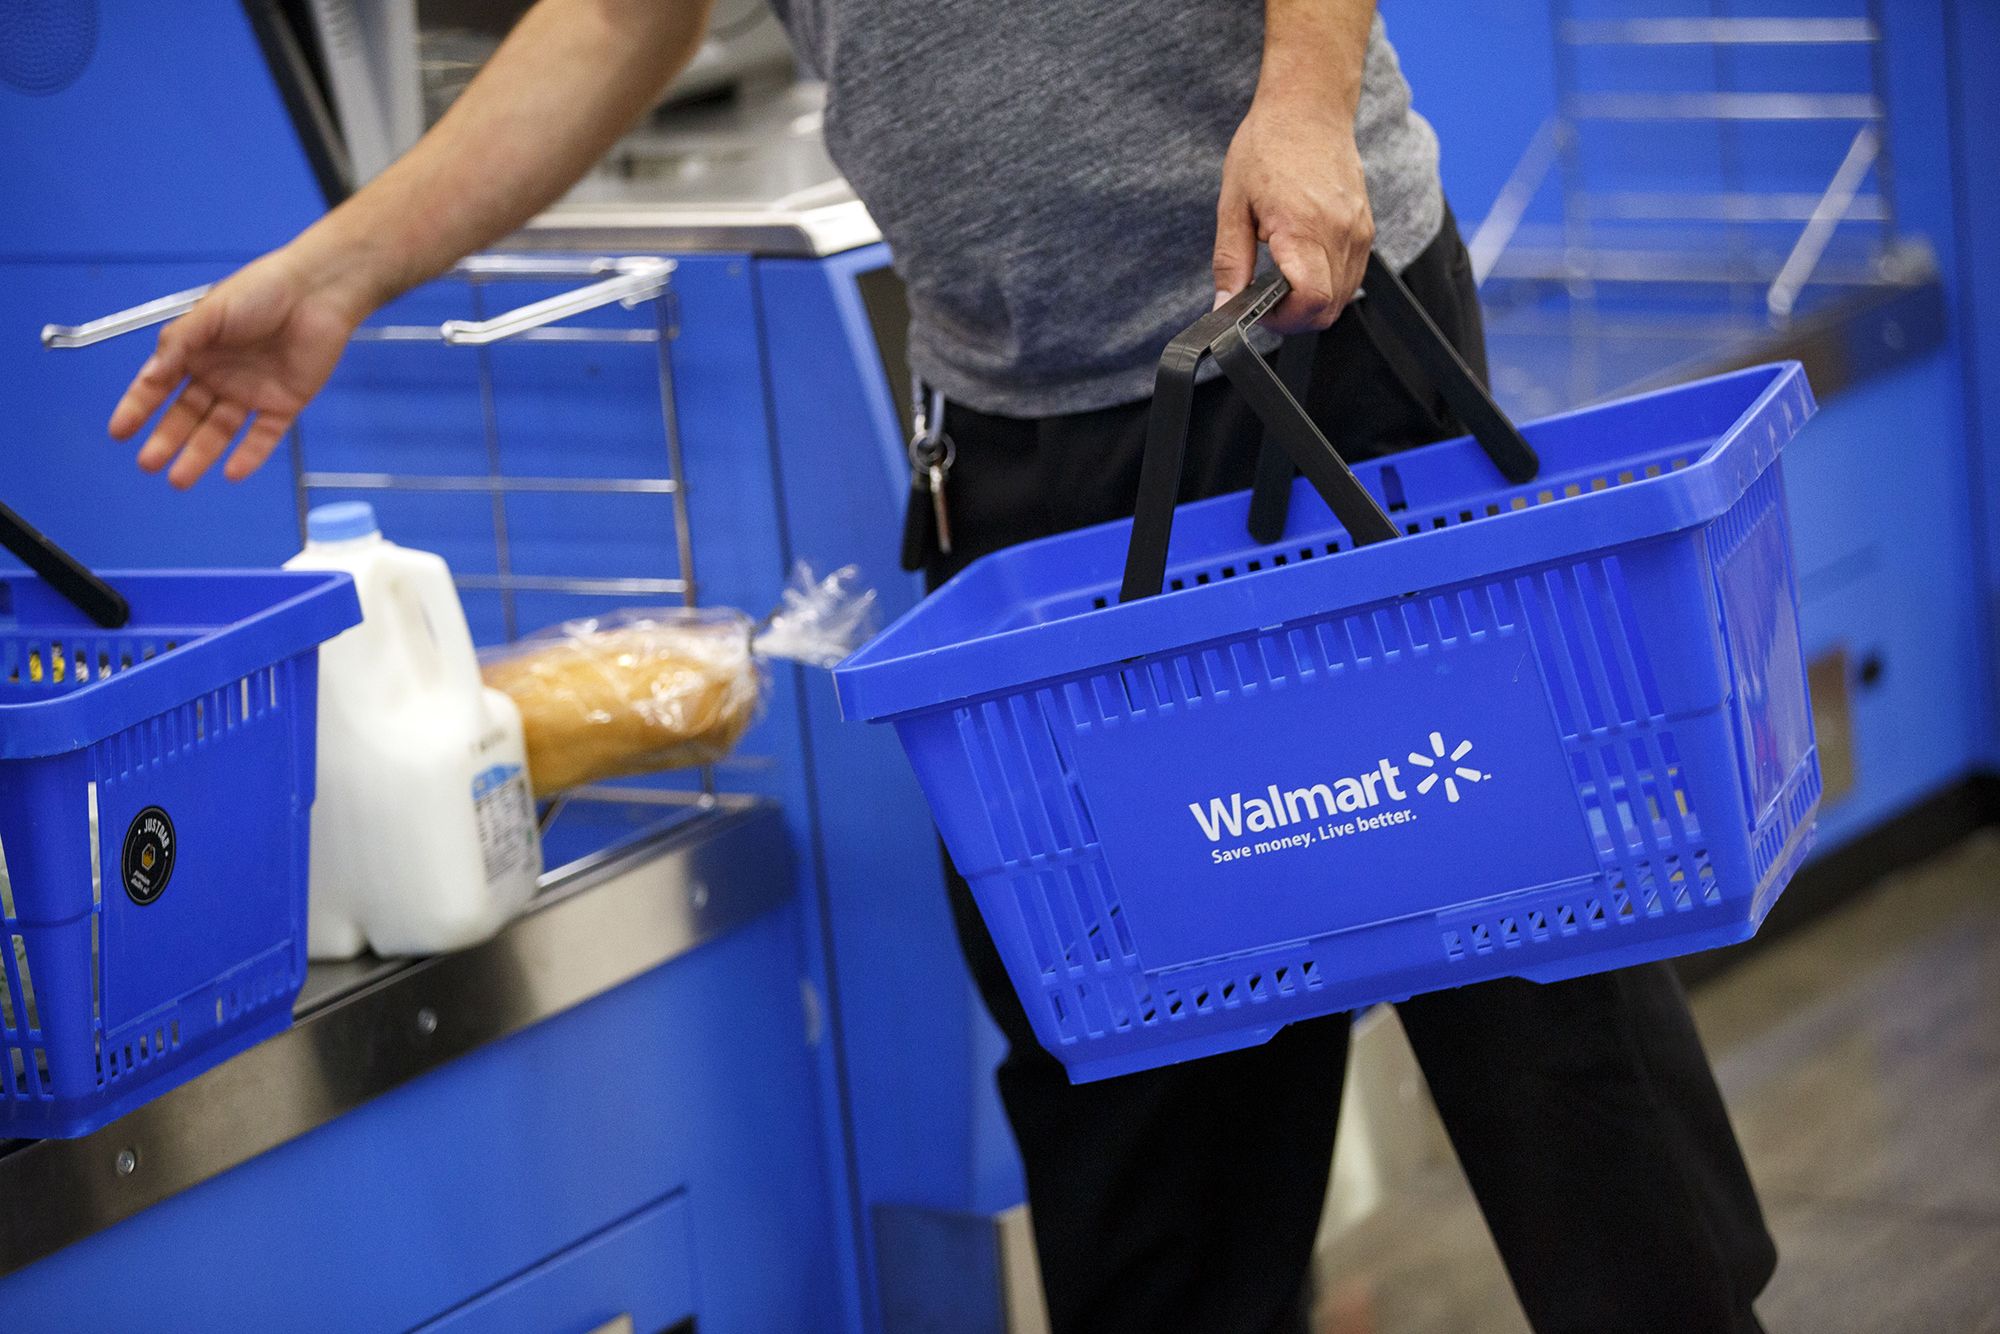 Walmart Plans to Remove Plastic Bags from Stores